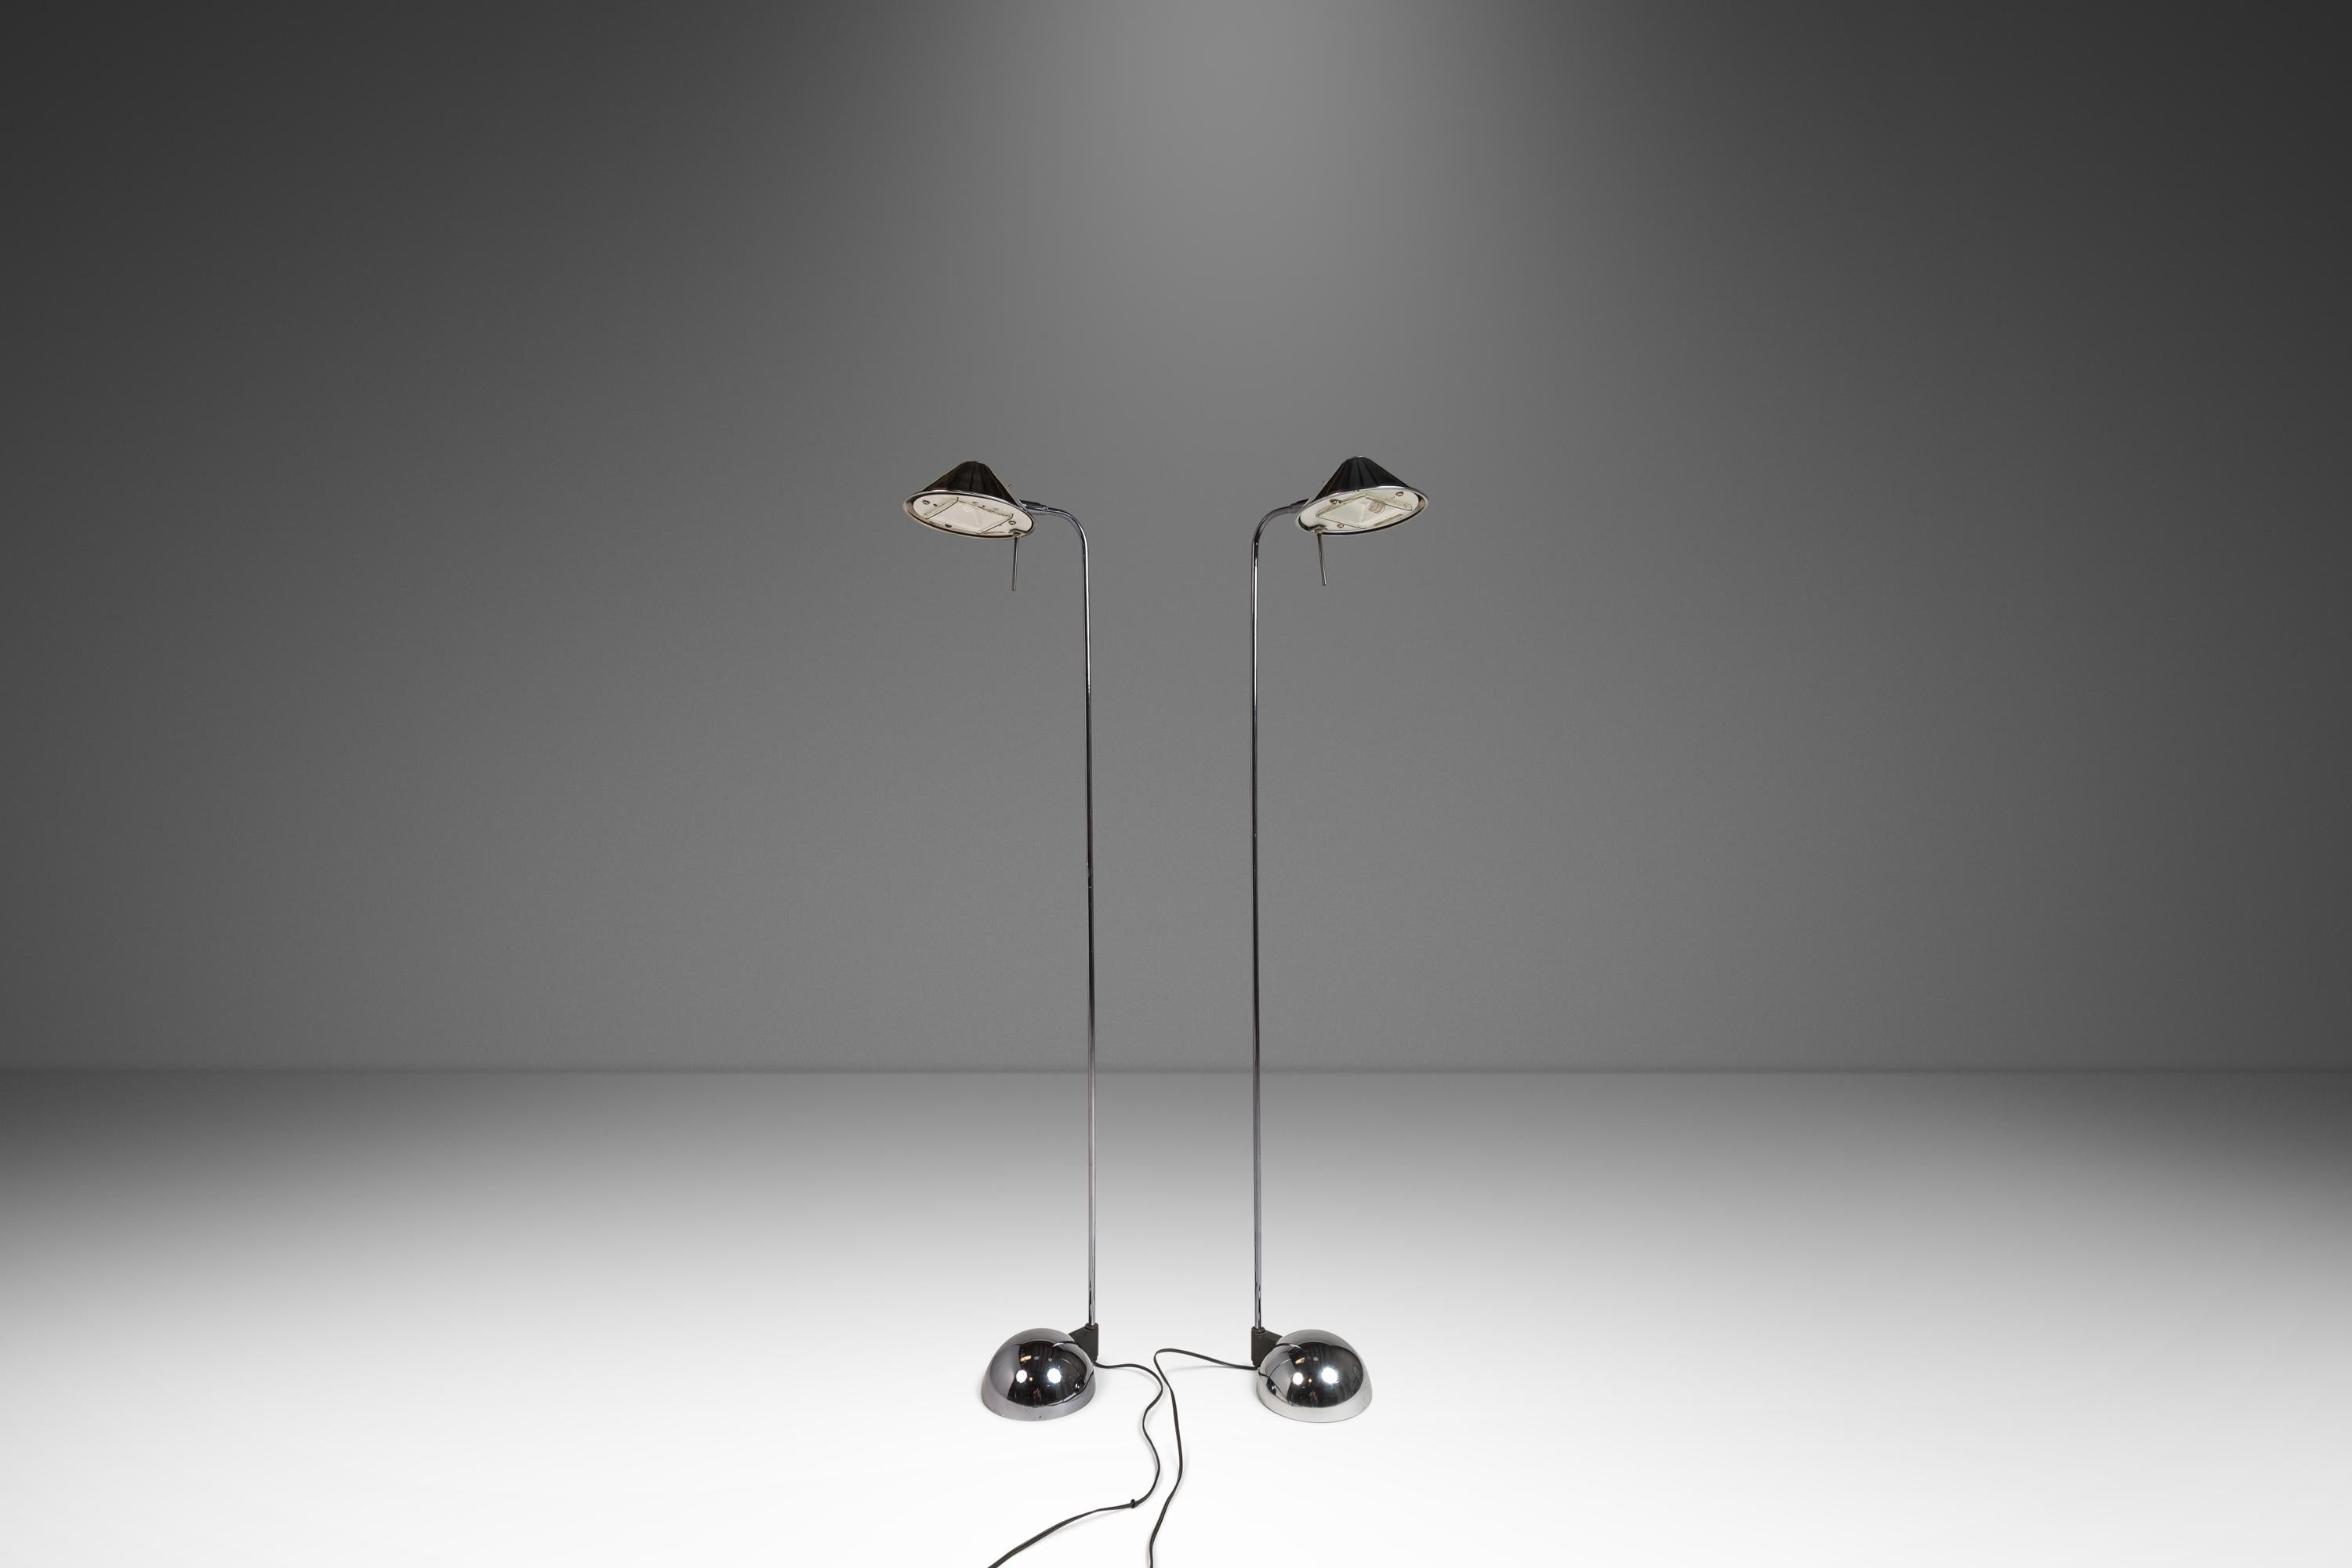 Set of 2 Post Modern Floor Lamps by Robert Sonneman for George Kovacs, c. 1987 In Good Condition For Sale In Deland, FL